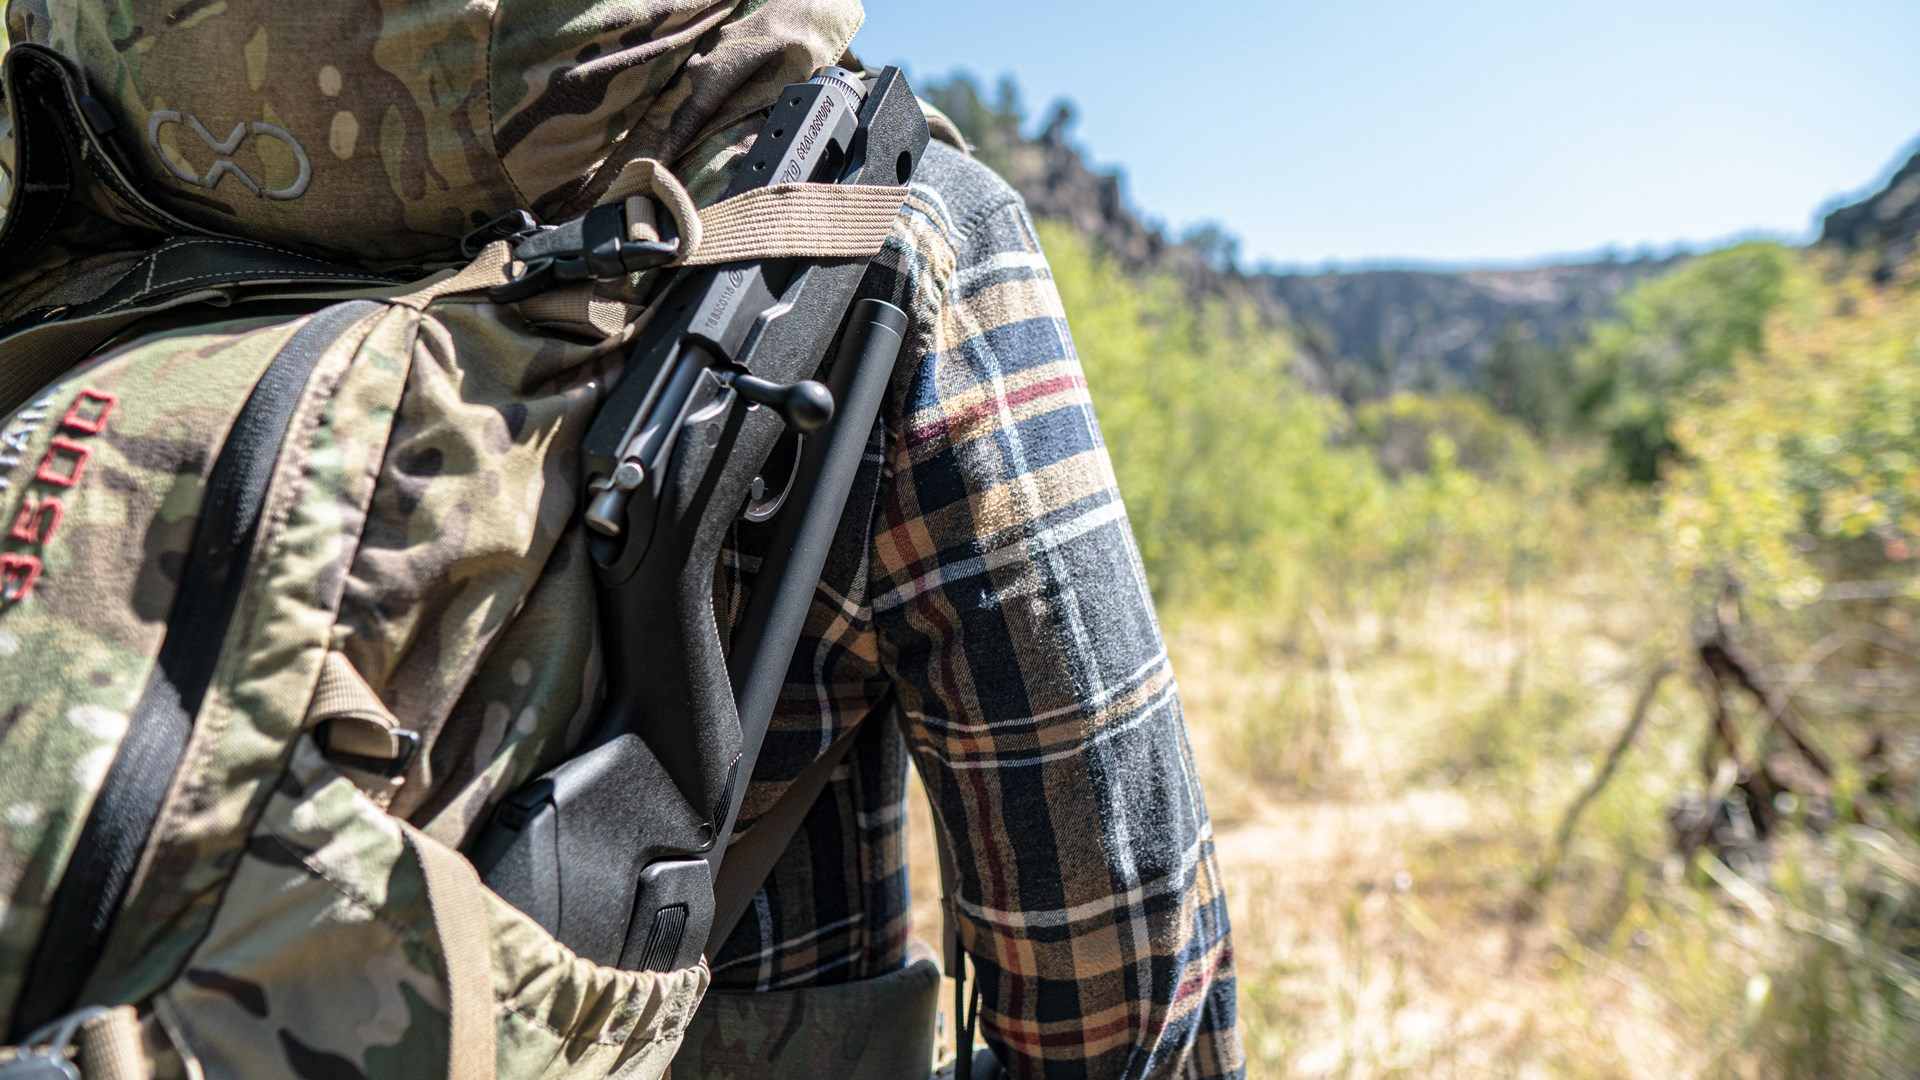 Man carrying the Tactical Solutions Owyhee Magnum rifle on the side of an outdoor pack.